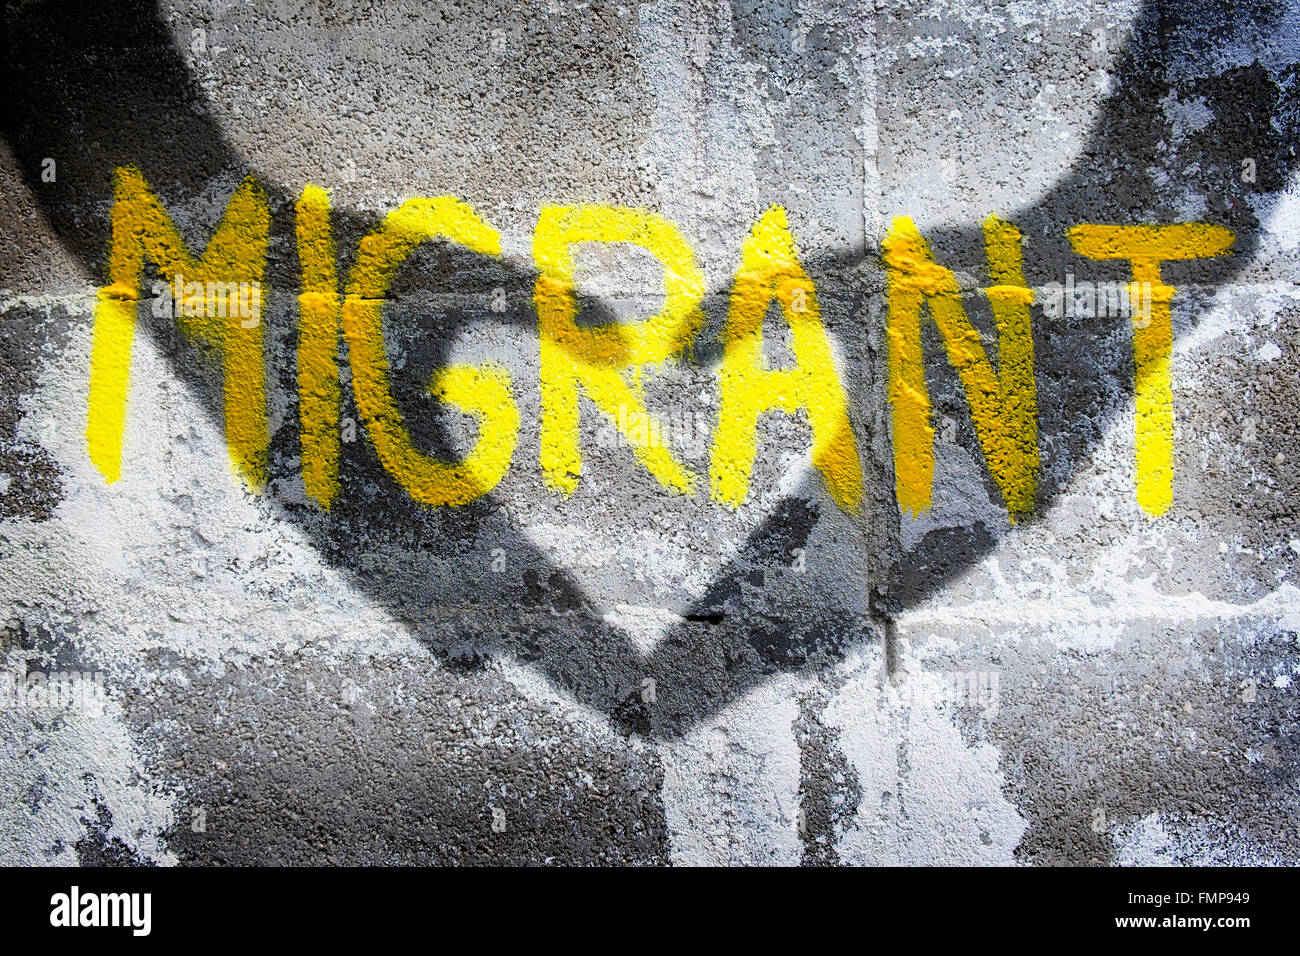 Graffiti on migration, a heart for refugees, Welcome symbol Stock Photo